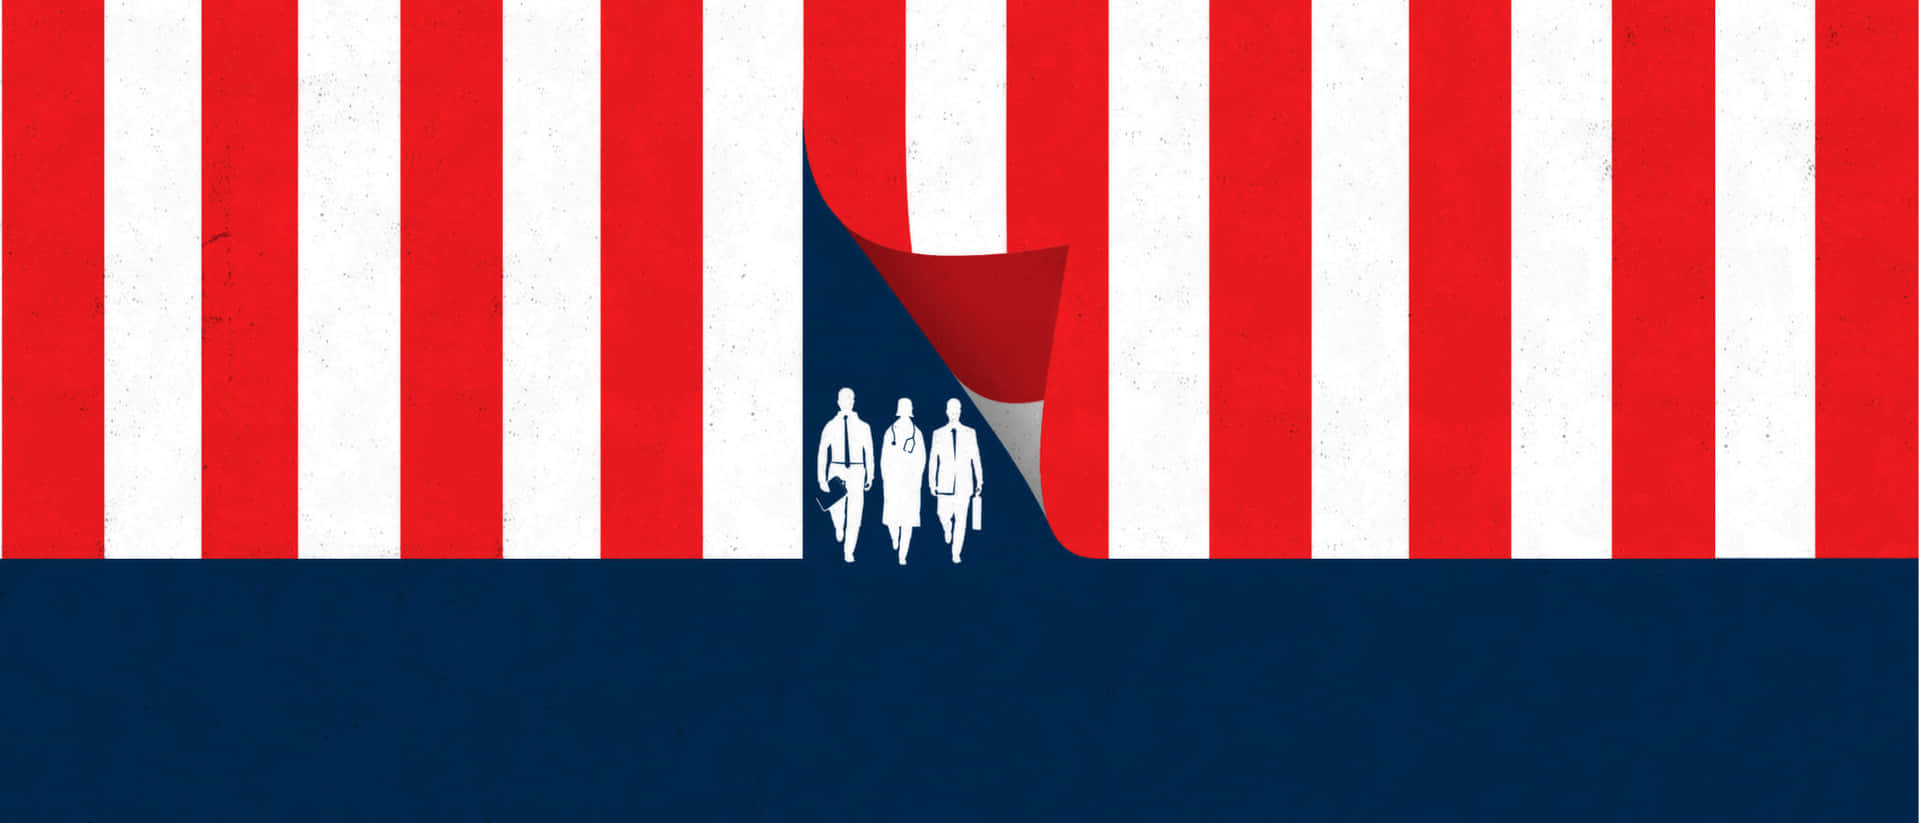 A Poster With A Red, White And Blue American Flag